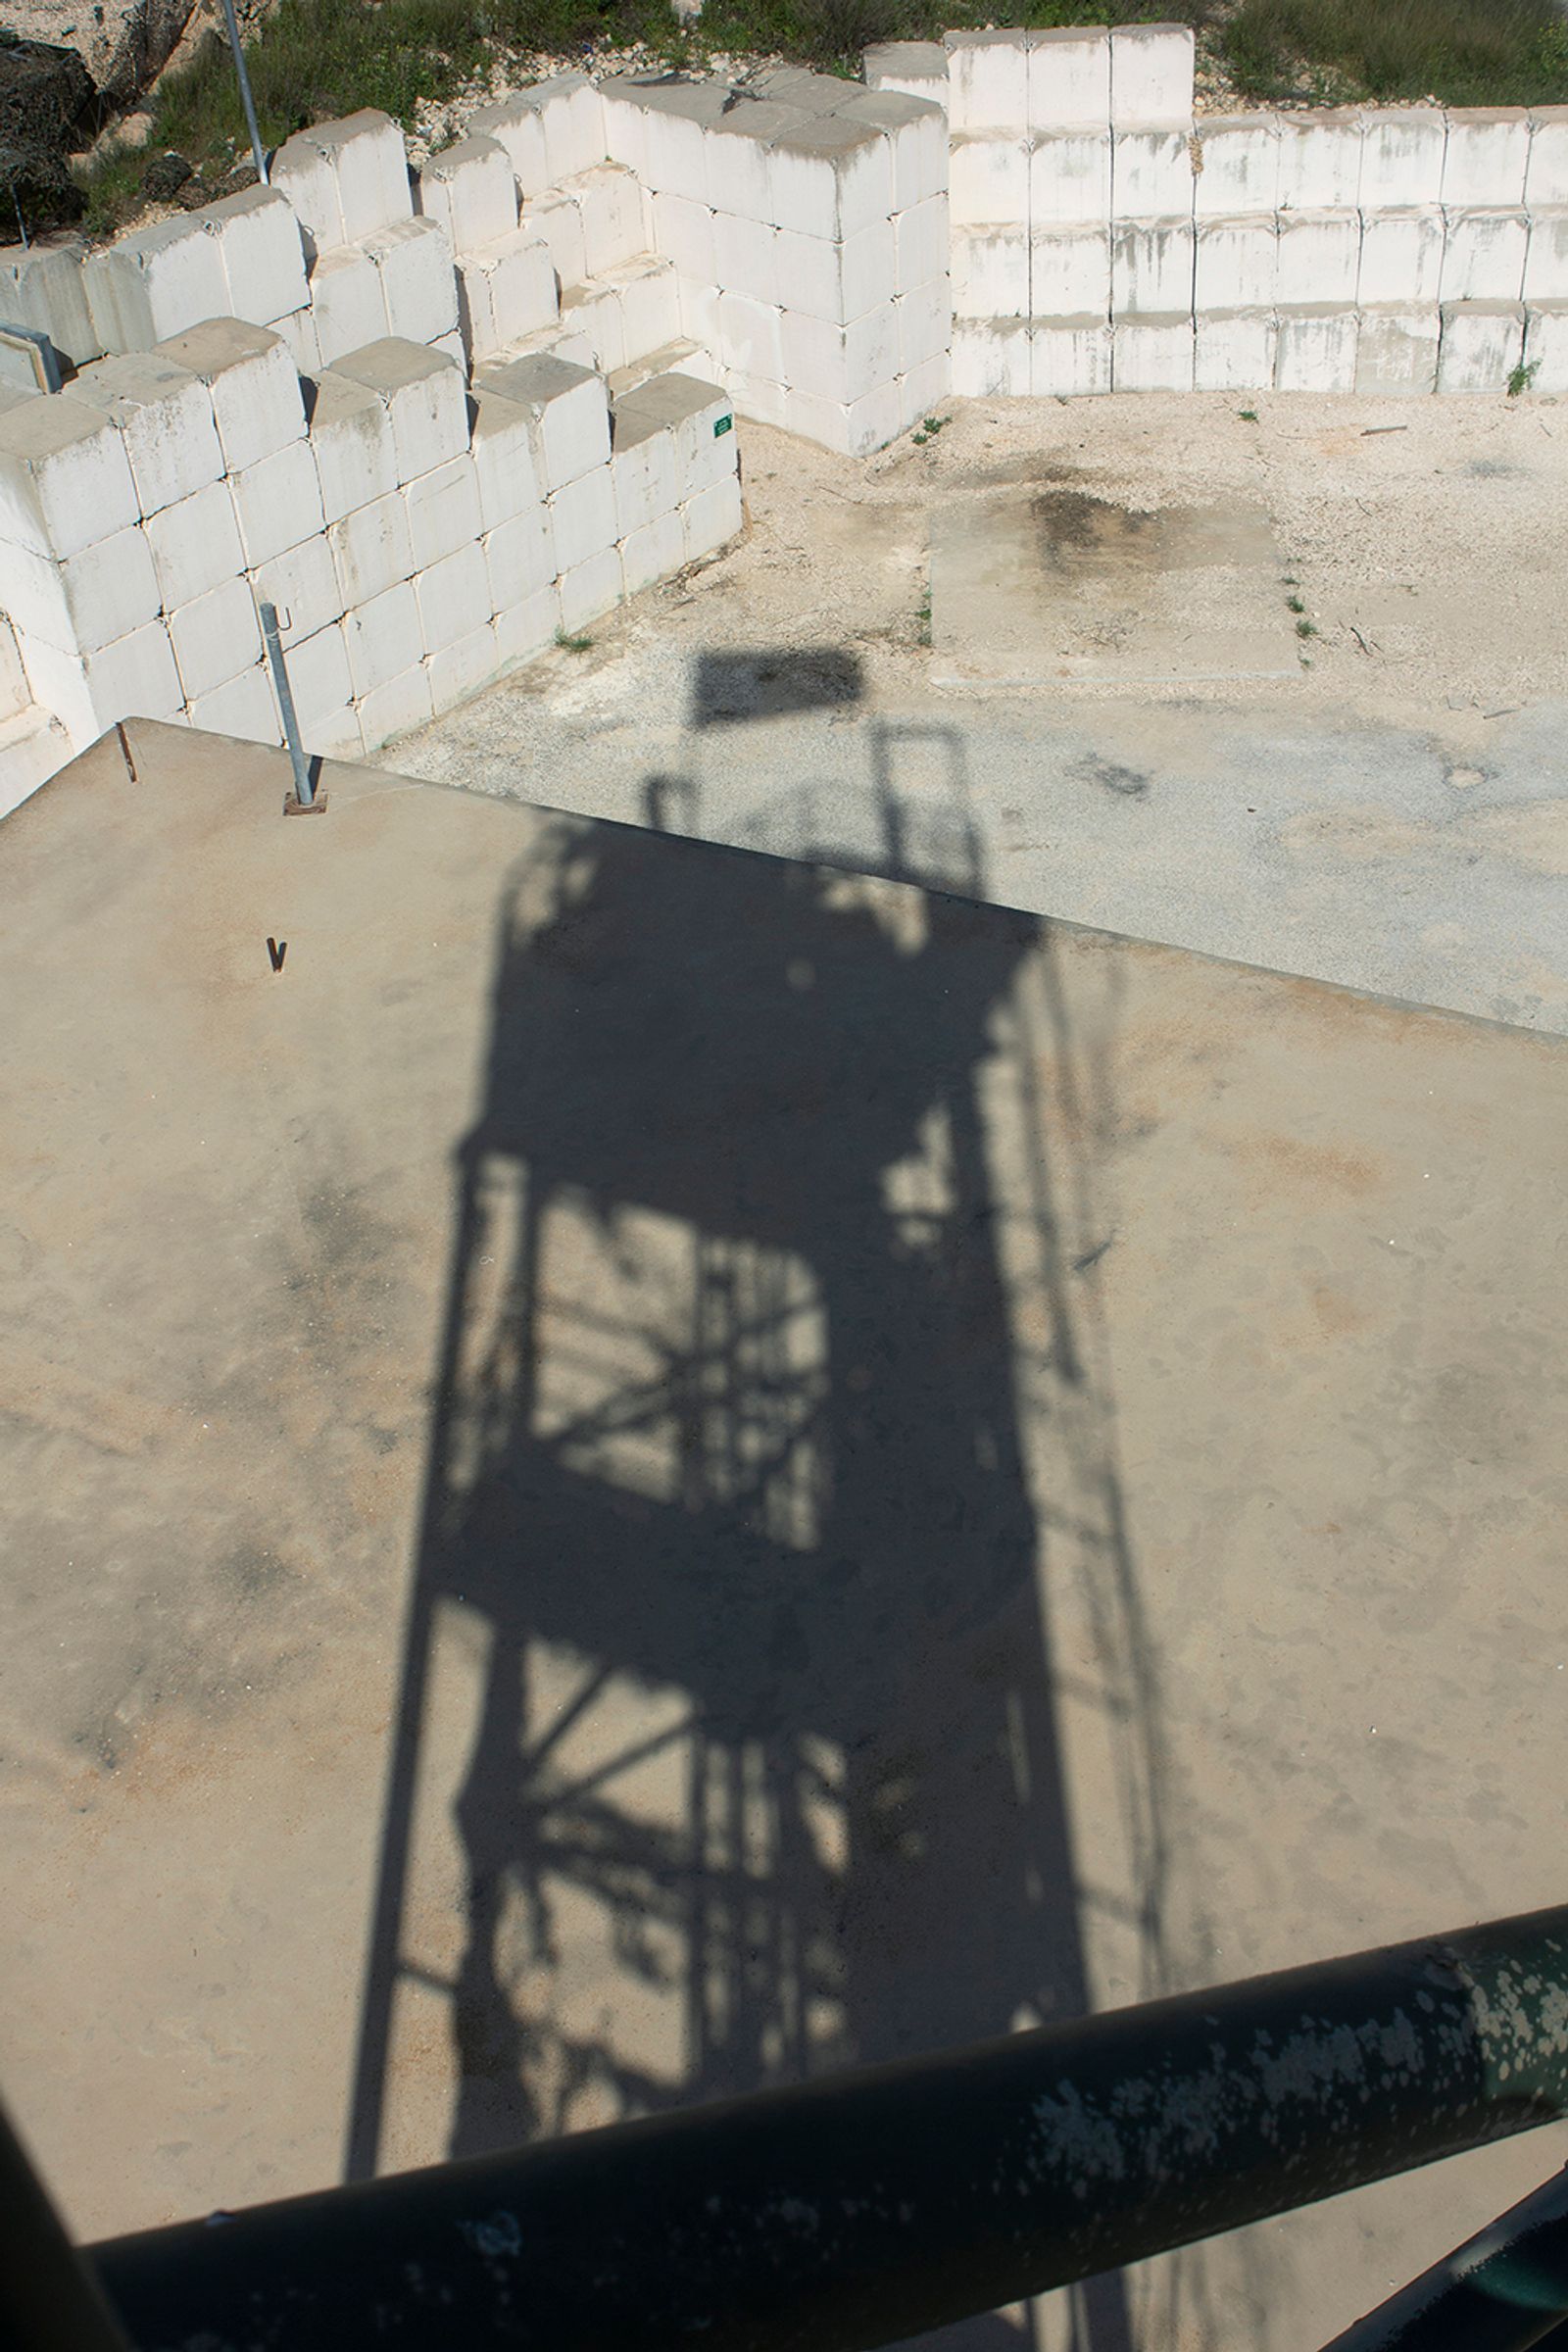 © Ekaterina Bodyagina - The shadow of a sight tower at the aban-doned military outpost in the North of Israel, close to the border with Lebanon